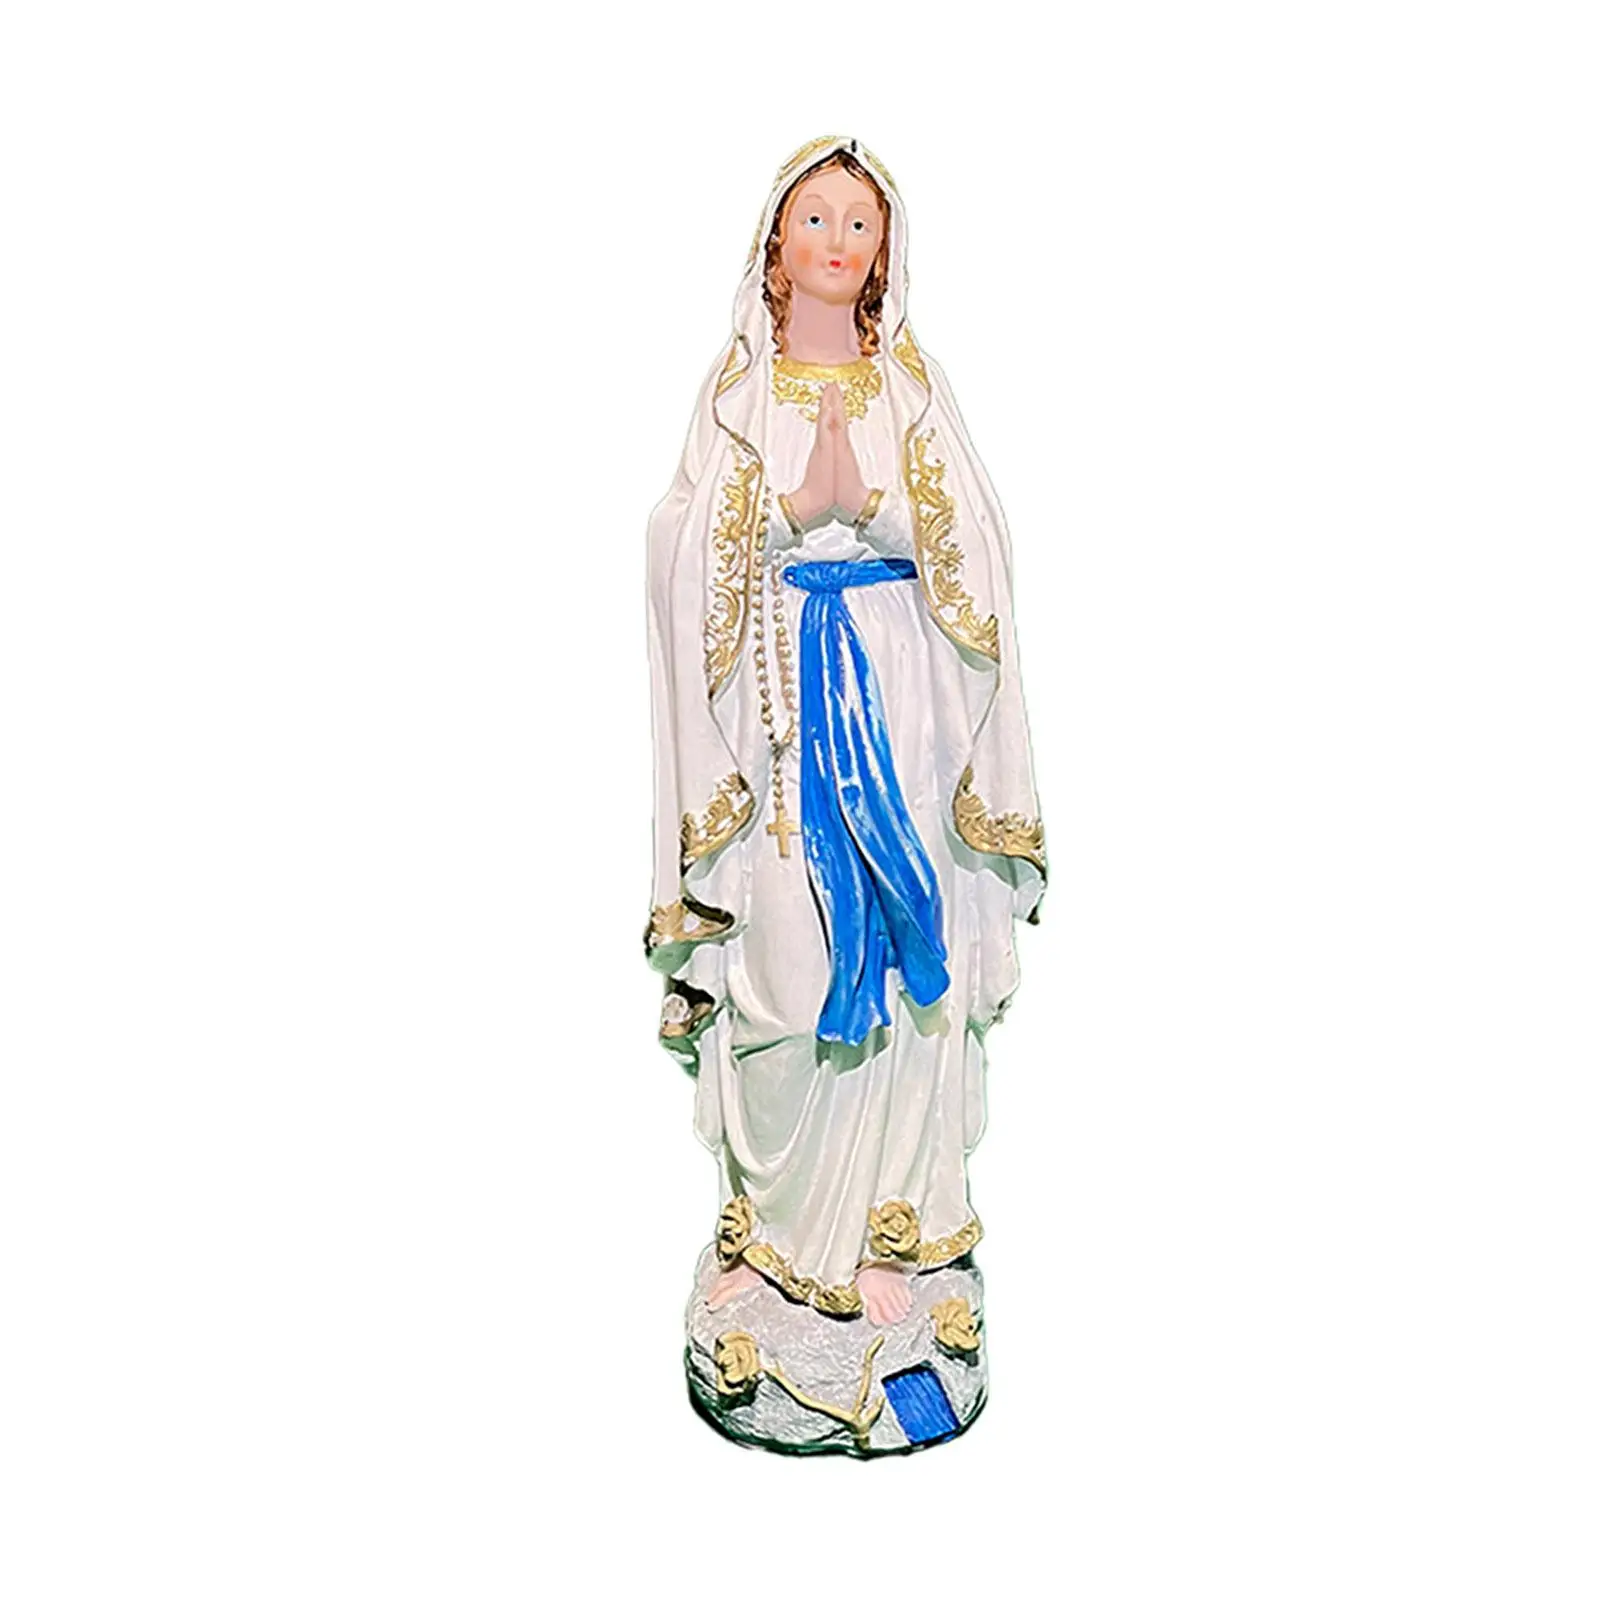 Mary Figurine Craft Resin Handpainted Holy Worship Catholic Religious Collection Sculpture for Prayer Family Shelf Home Tabletop